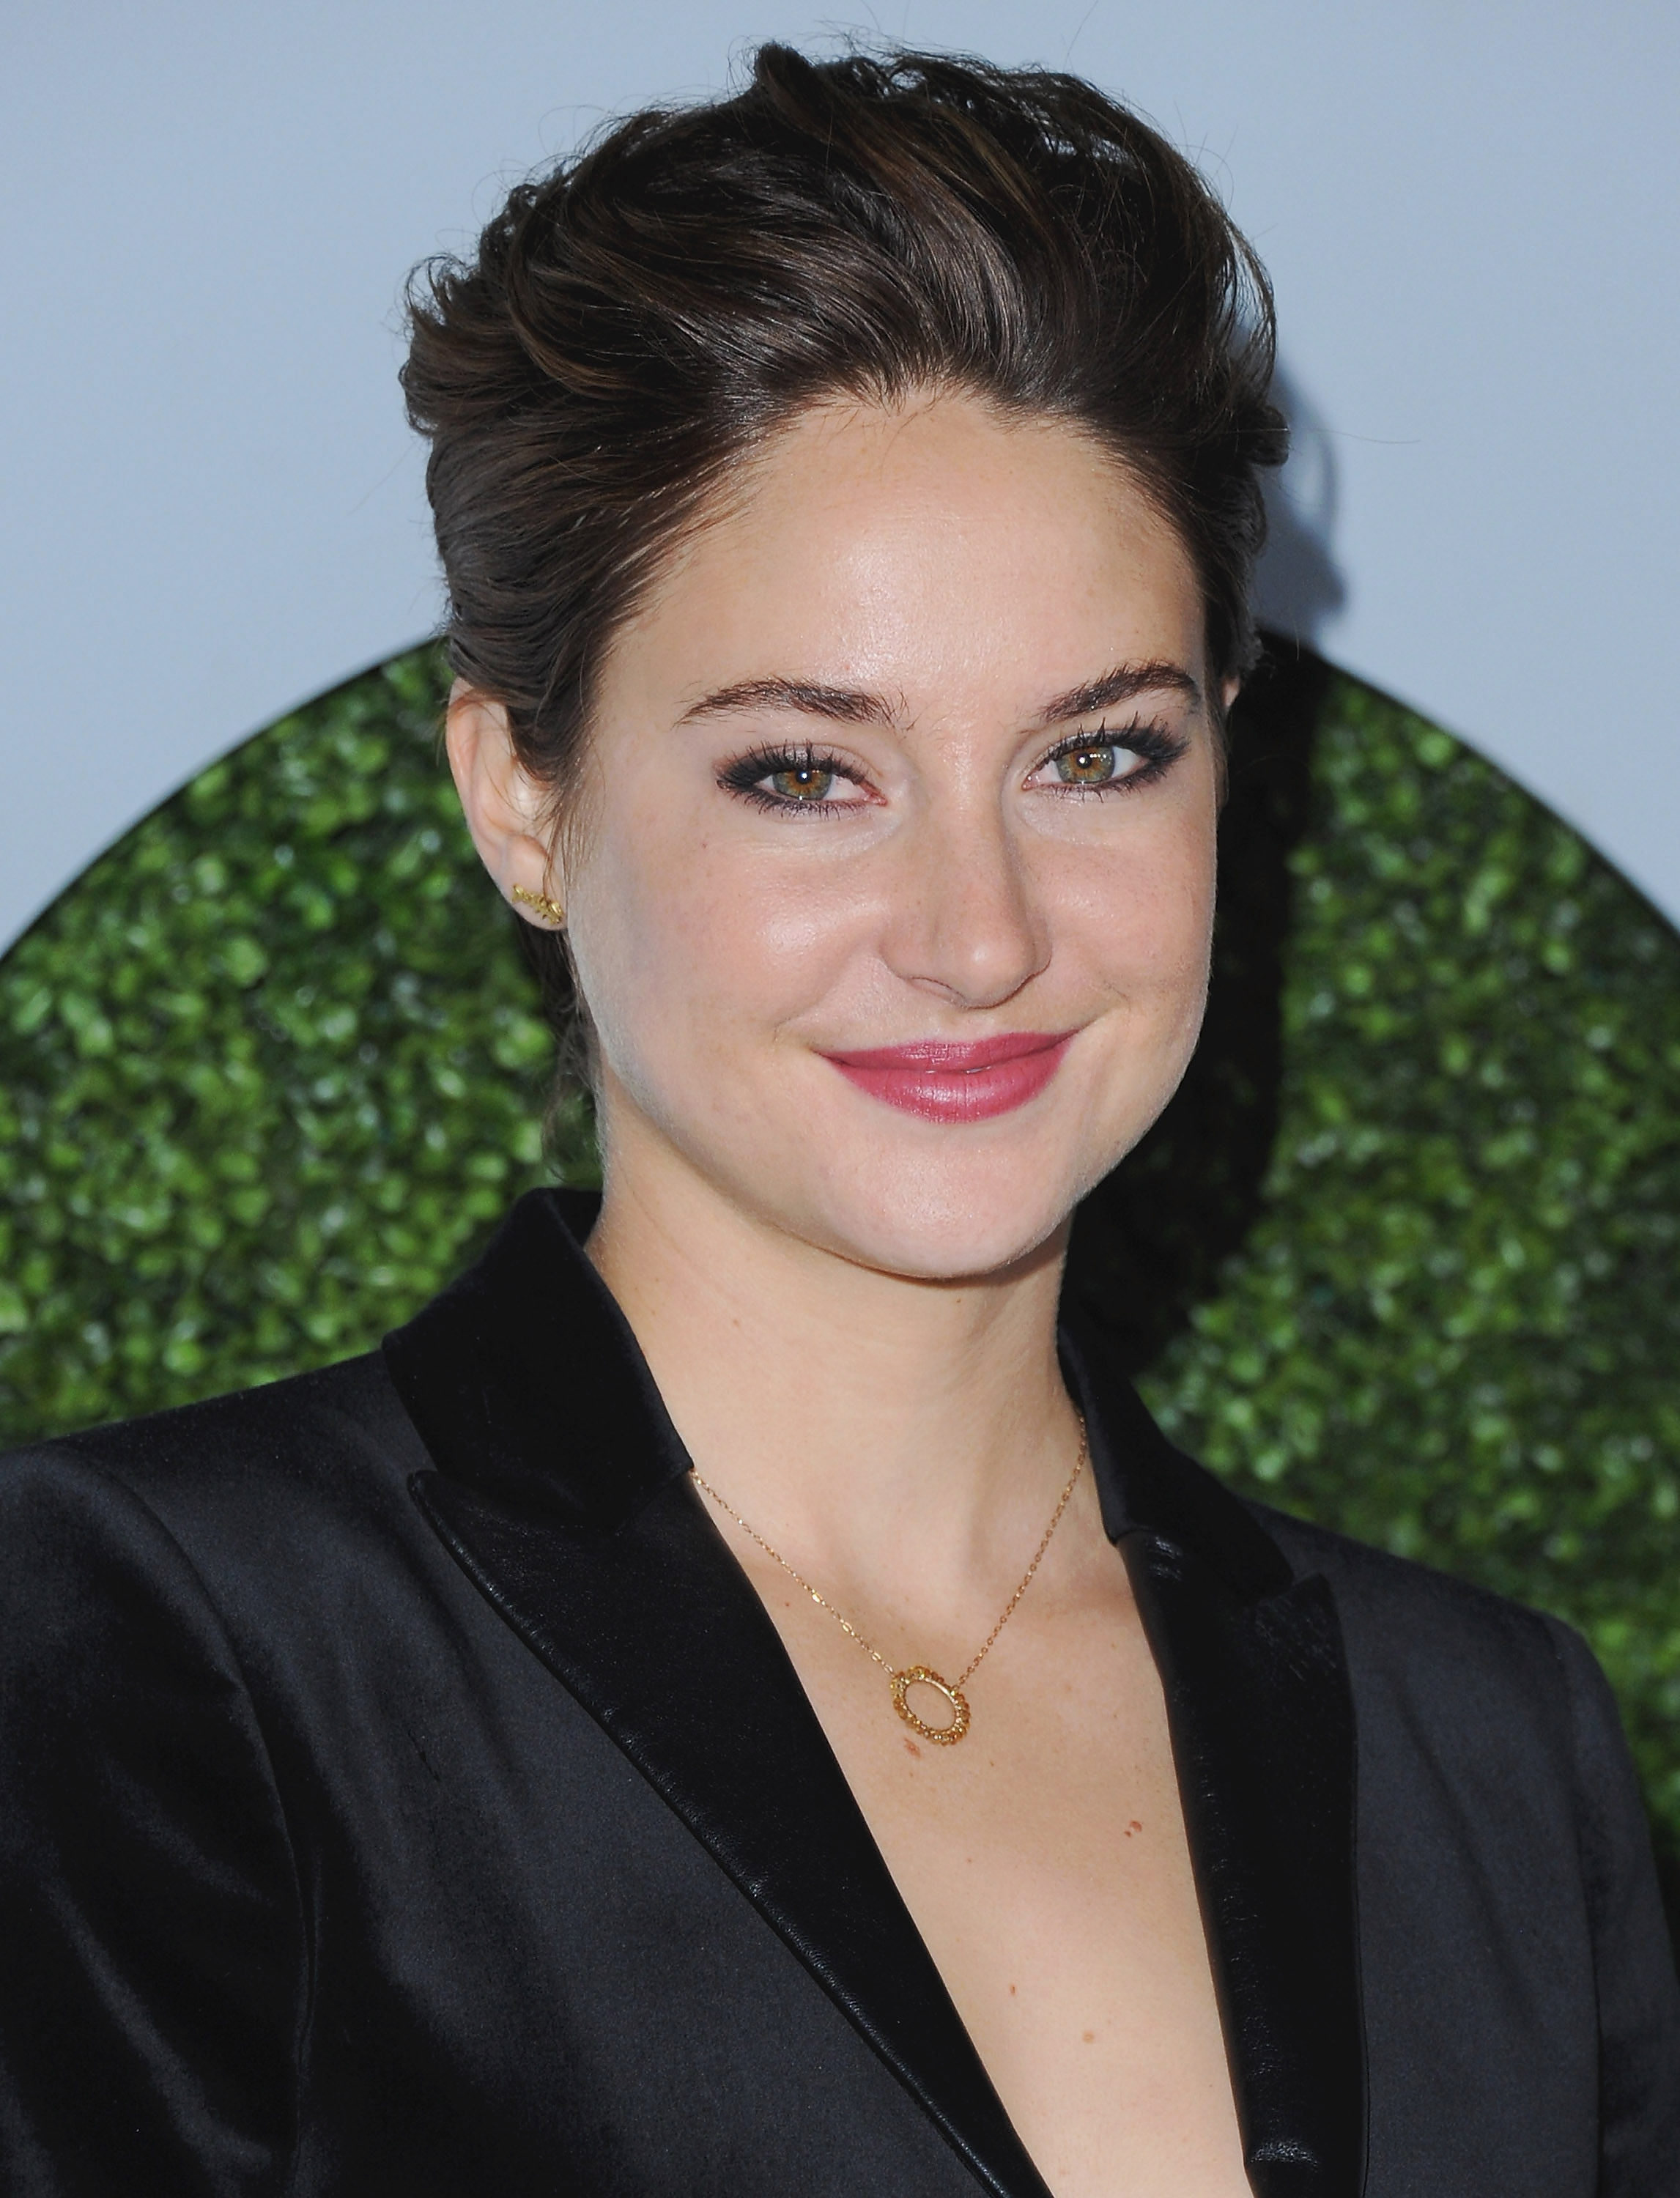 Actress Shailene Woodley arrives at the 2014 GQ Men Of The Year Party at Chateau Marmont on December 4, 2014 in Los Angeles, California. (Jon Kopaloff&mdash;FilmMagic/Getty Images)